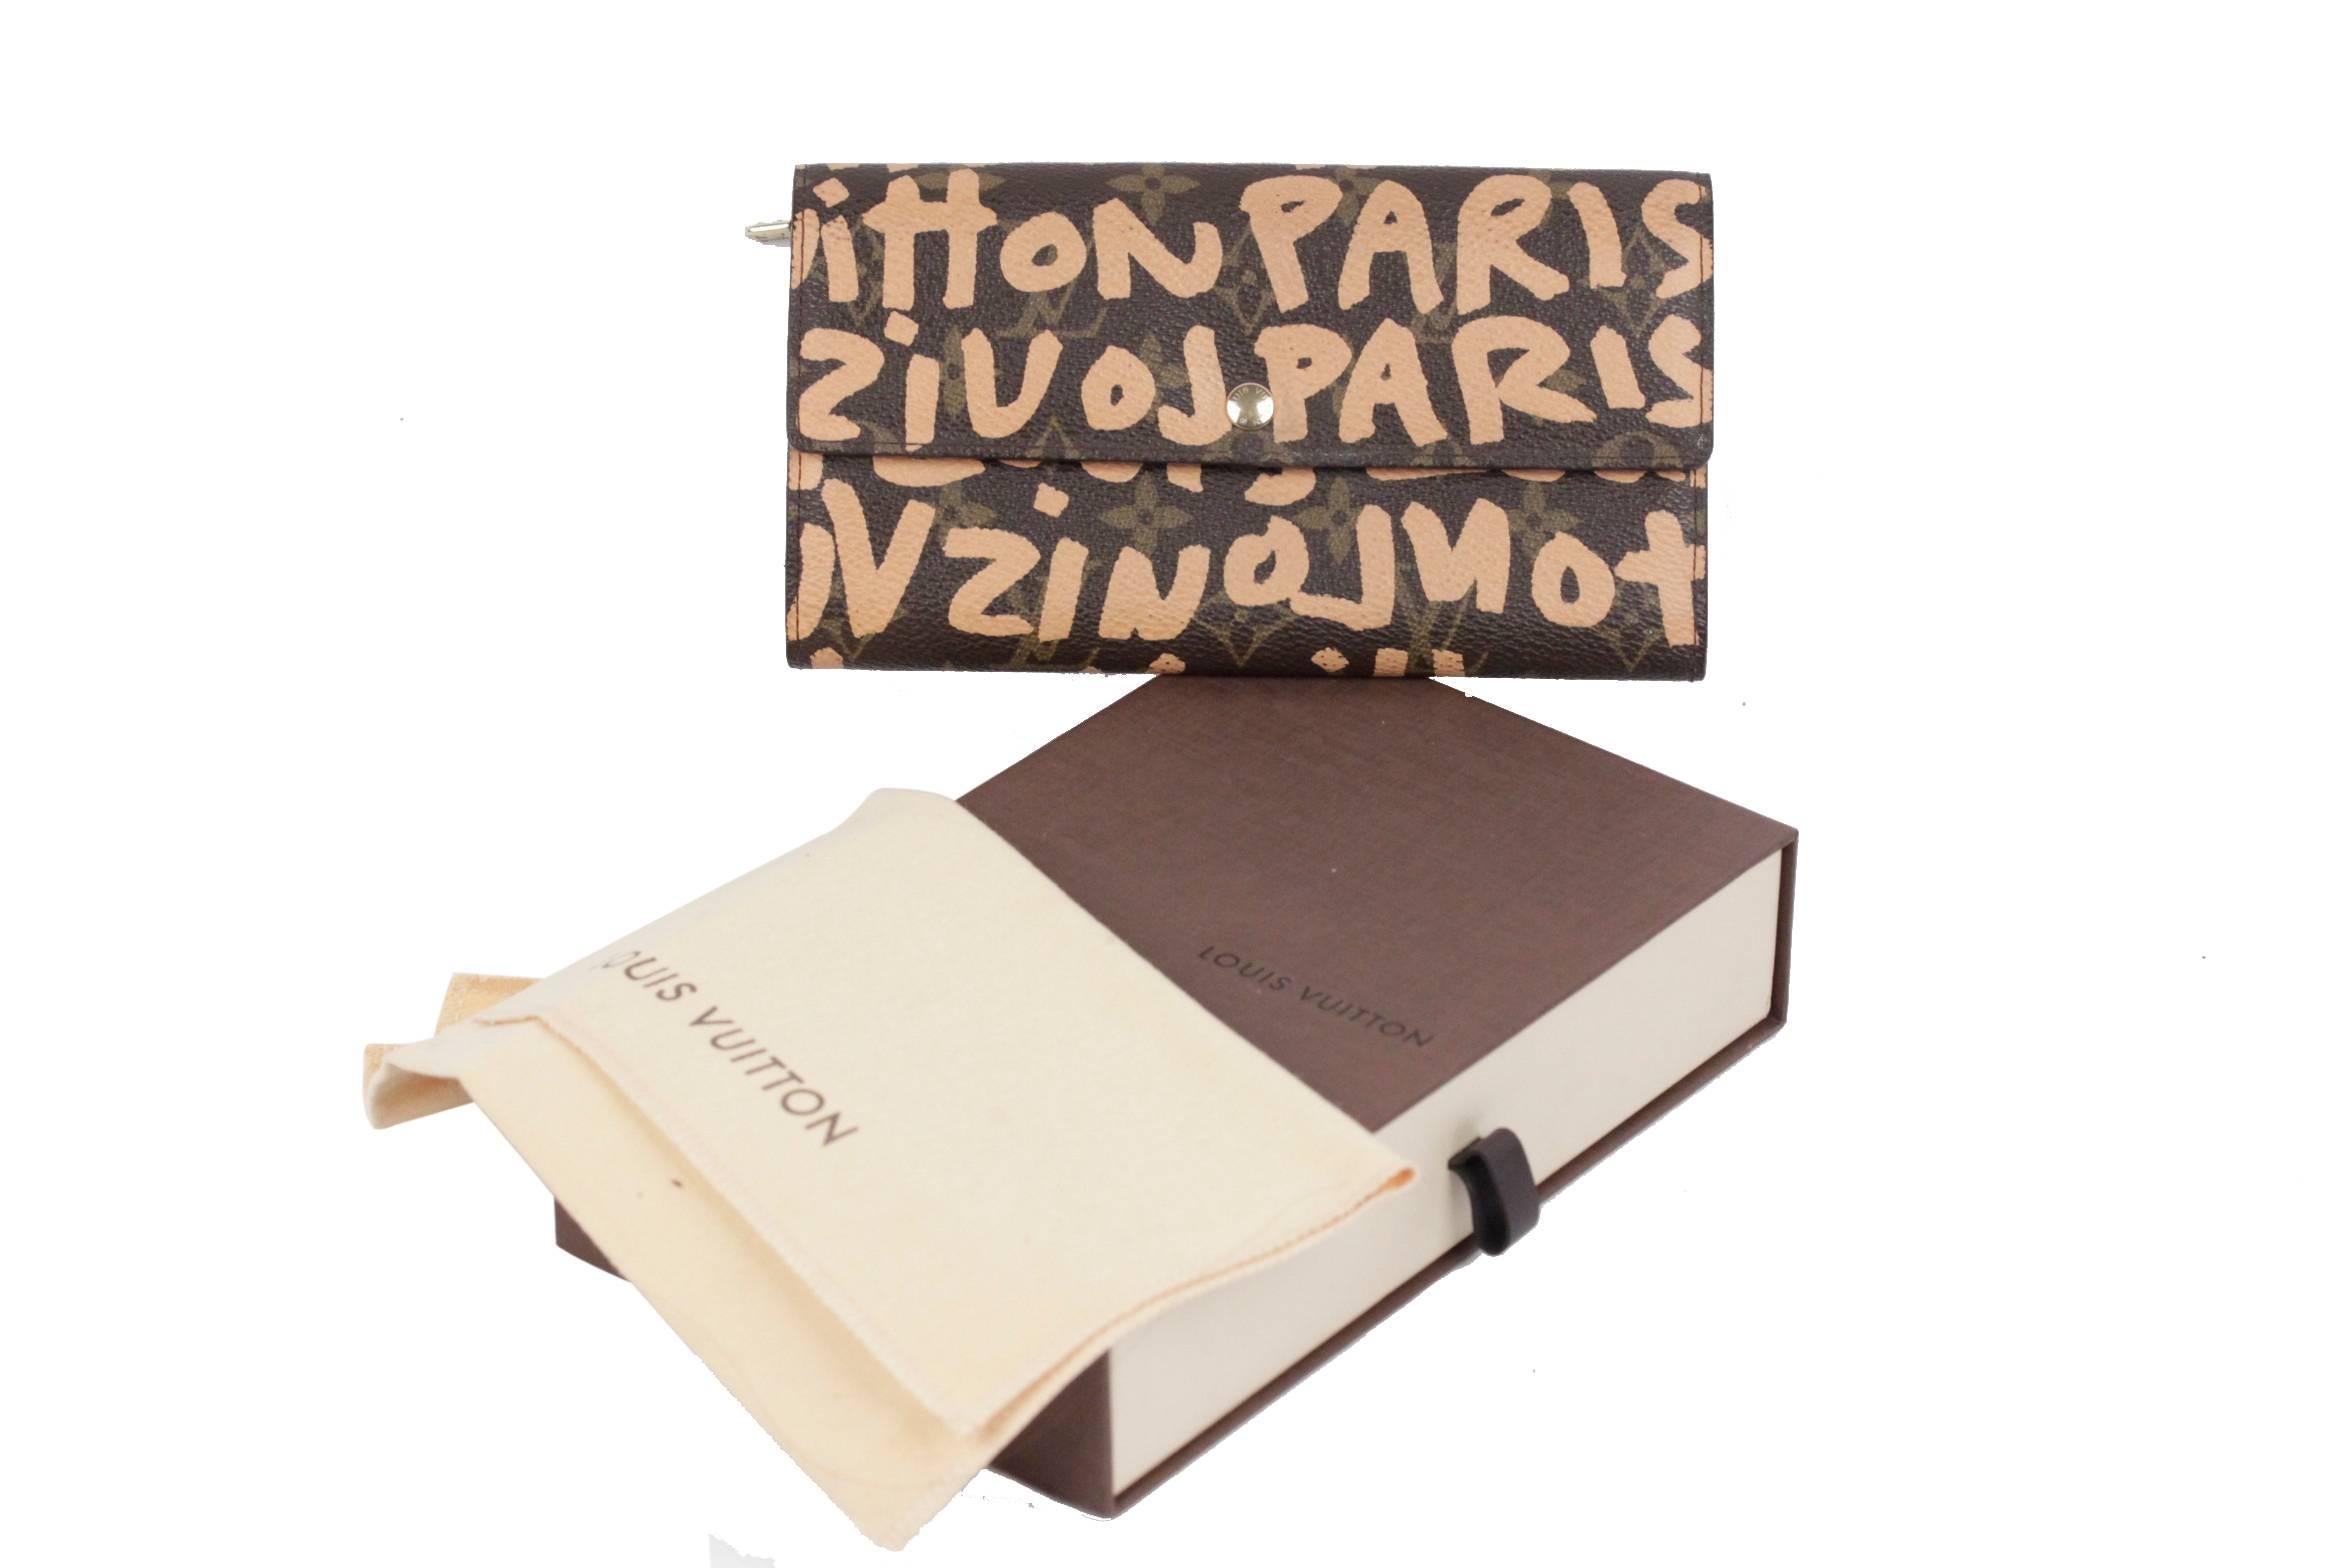  - LOUIS VUITTON Monogram Sprouse Graffiti Porte Monnaie Wallet
- This wallet is a limited edition by Stephen Sprouse, designed for the 2001' Louis Vuitton collection.
- timeless monogram canvas decorated with peach colored graffiti graphics
-